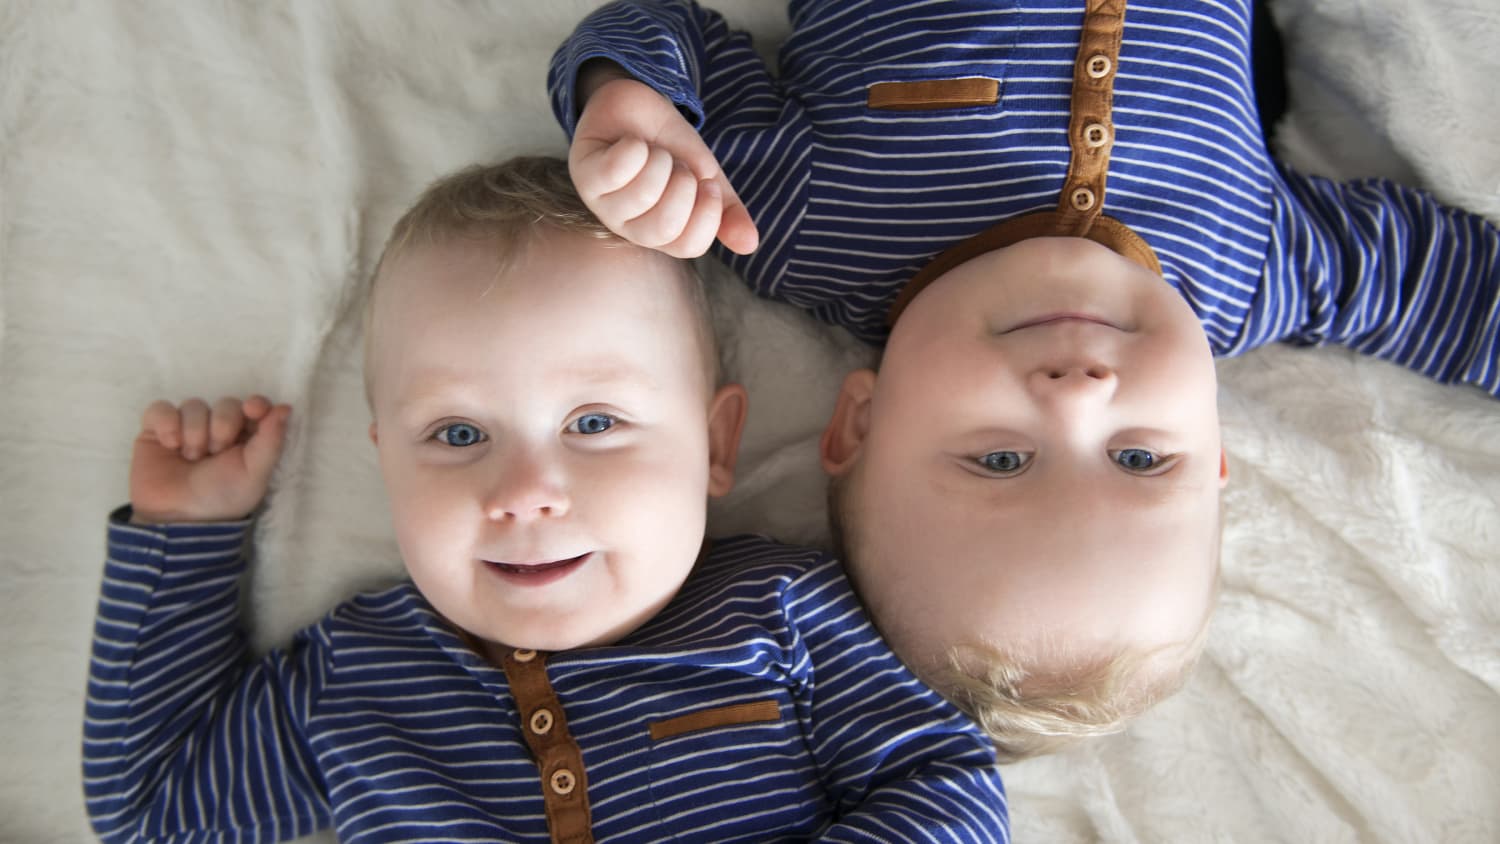 Twin boys, possibly after treatment for twin-to-twin transfusion syndrome